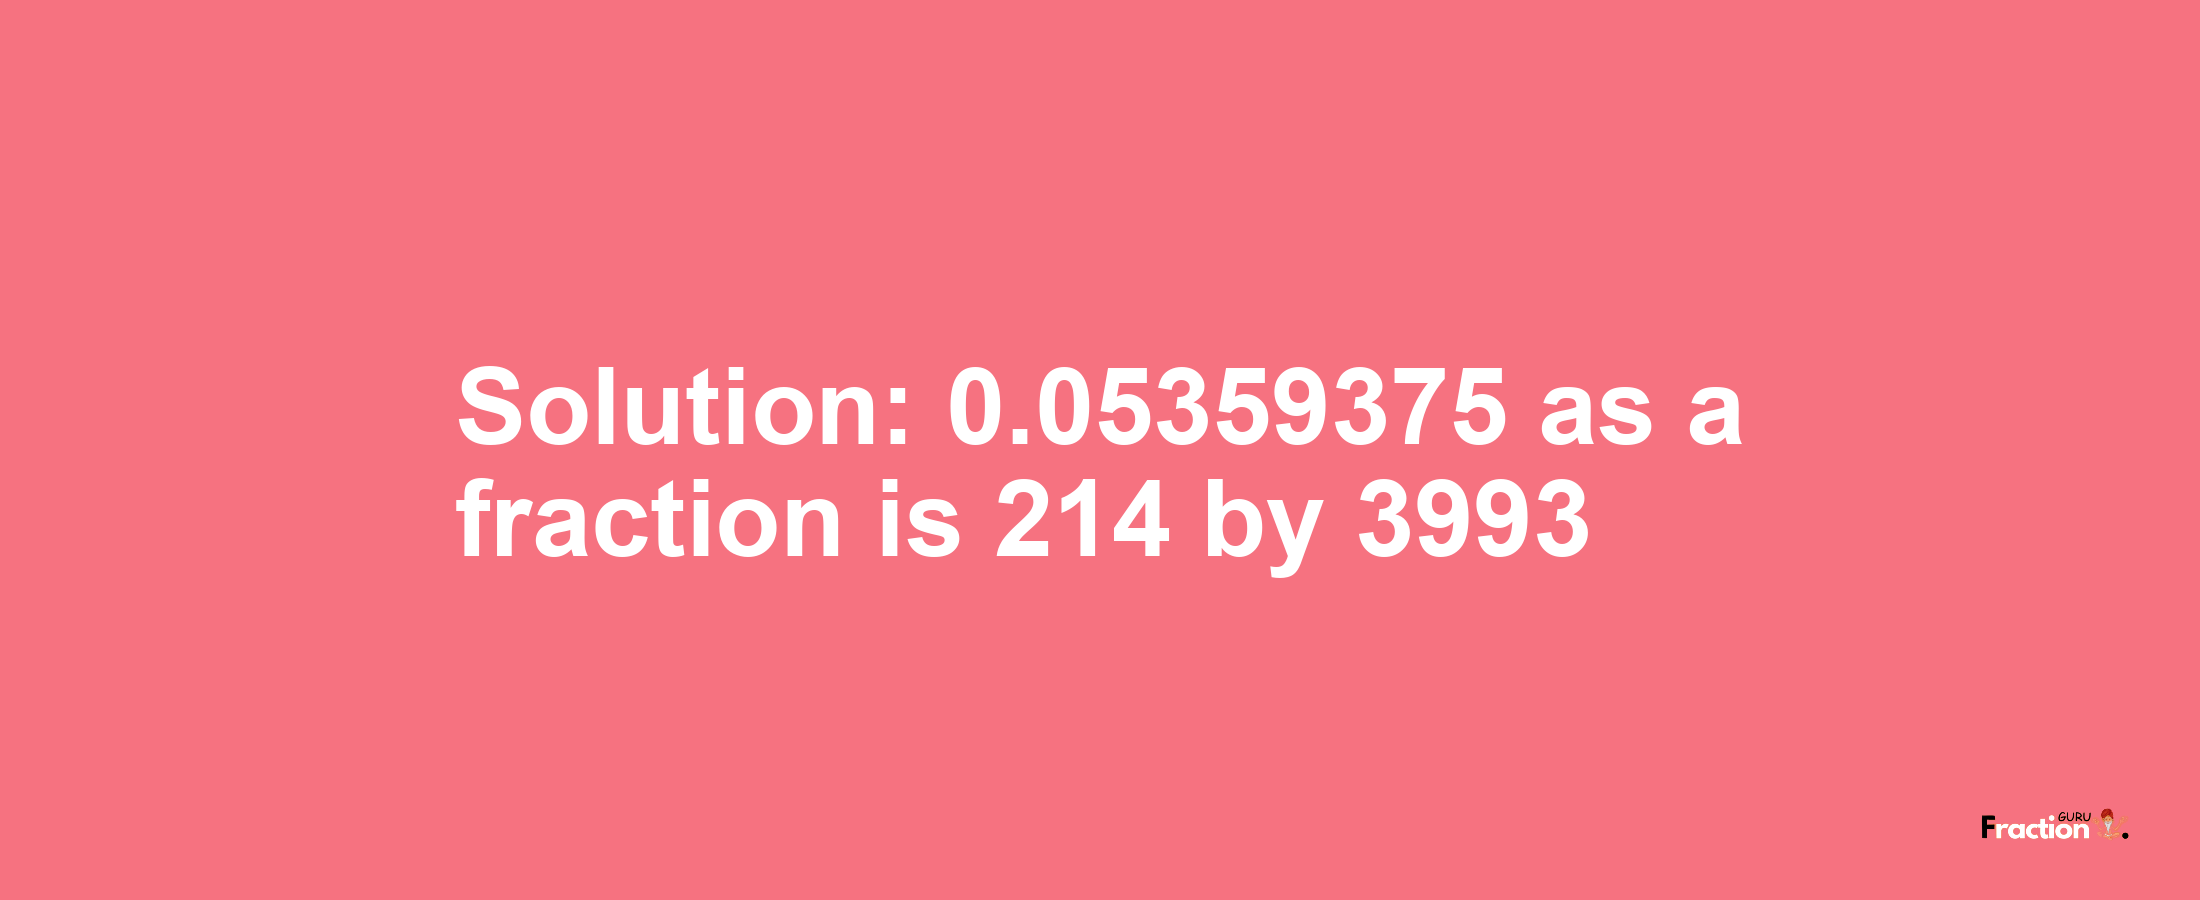 Solution:0.05359375 as a fraction is 214/3993